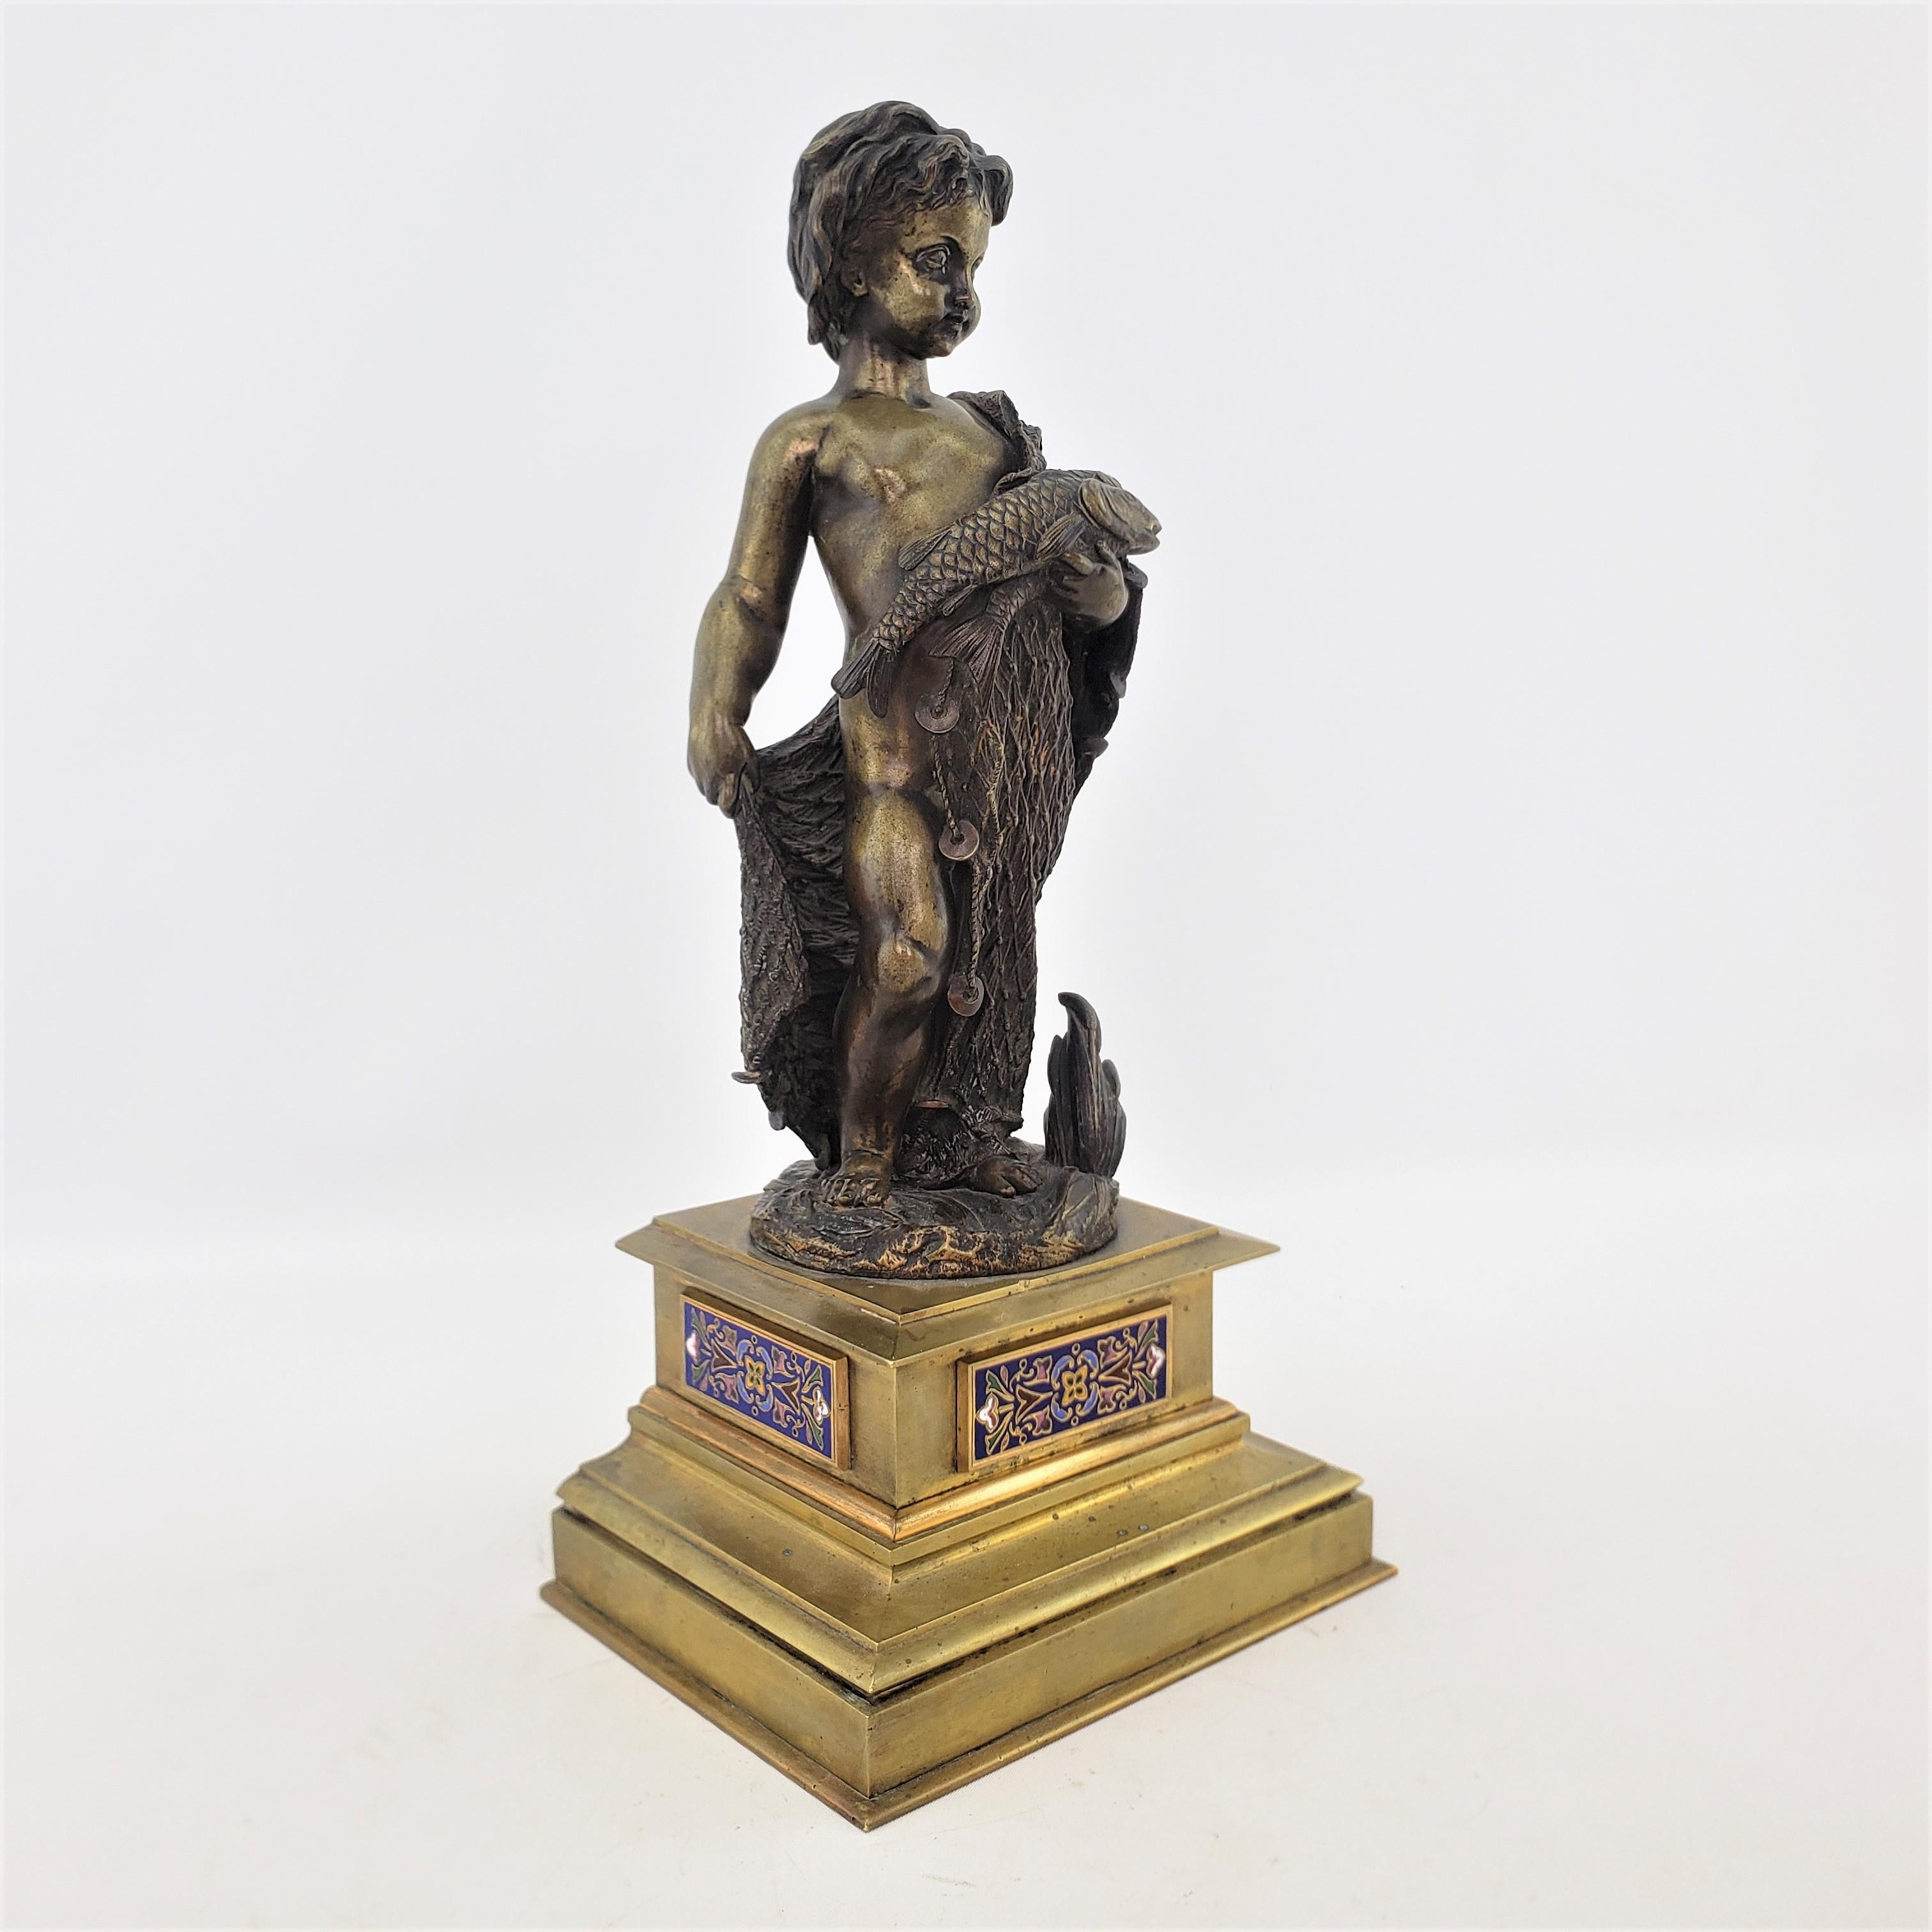 This antique bronze sculpture is unsigned, but presumed to have originated from Italy and date to approximately 1880 and done in the period late Victorian style. This well executed bronze depicts a young child draped standing on the shore, draped